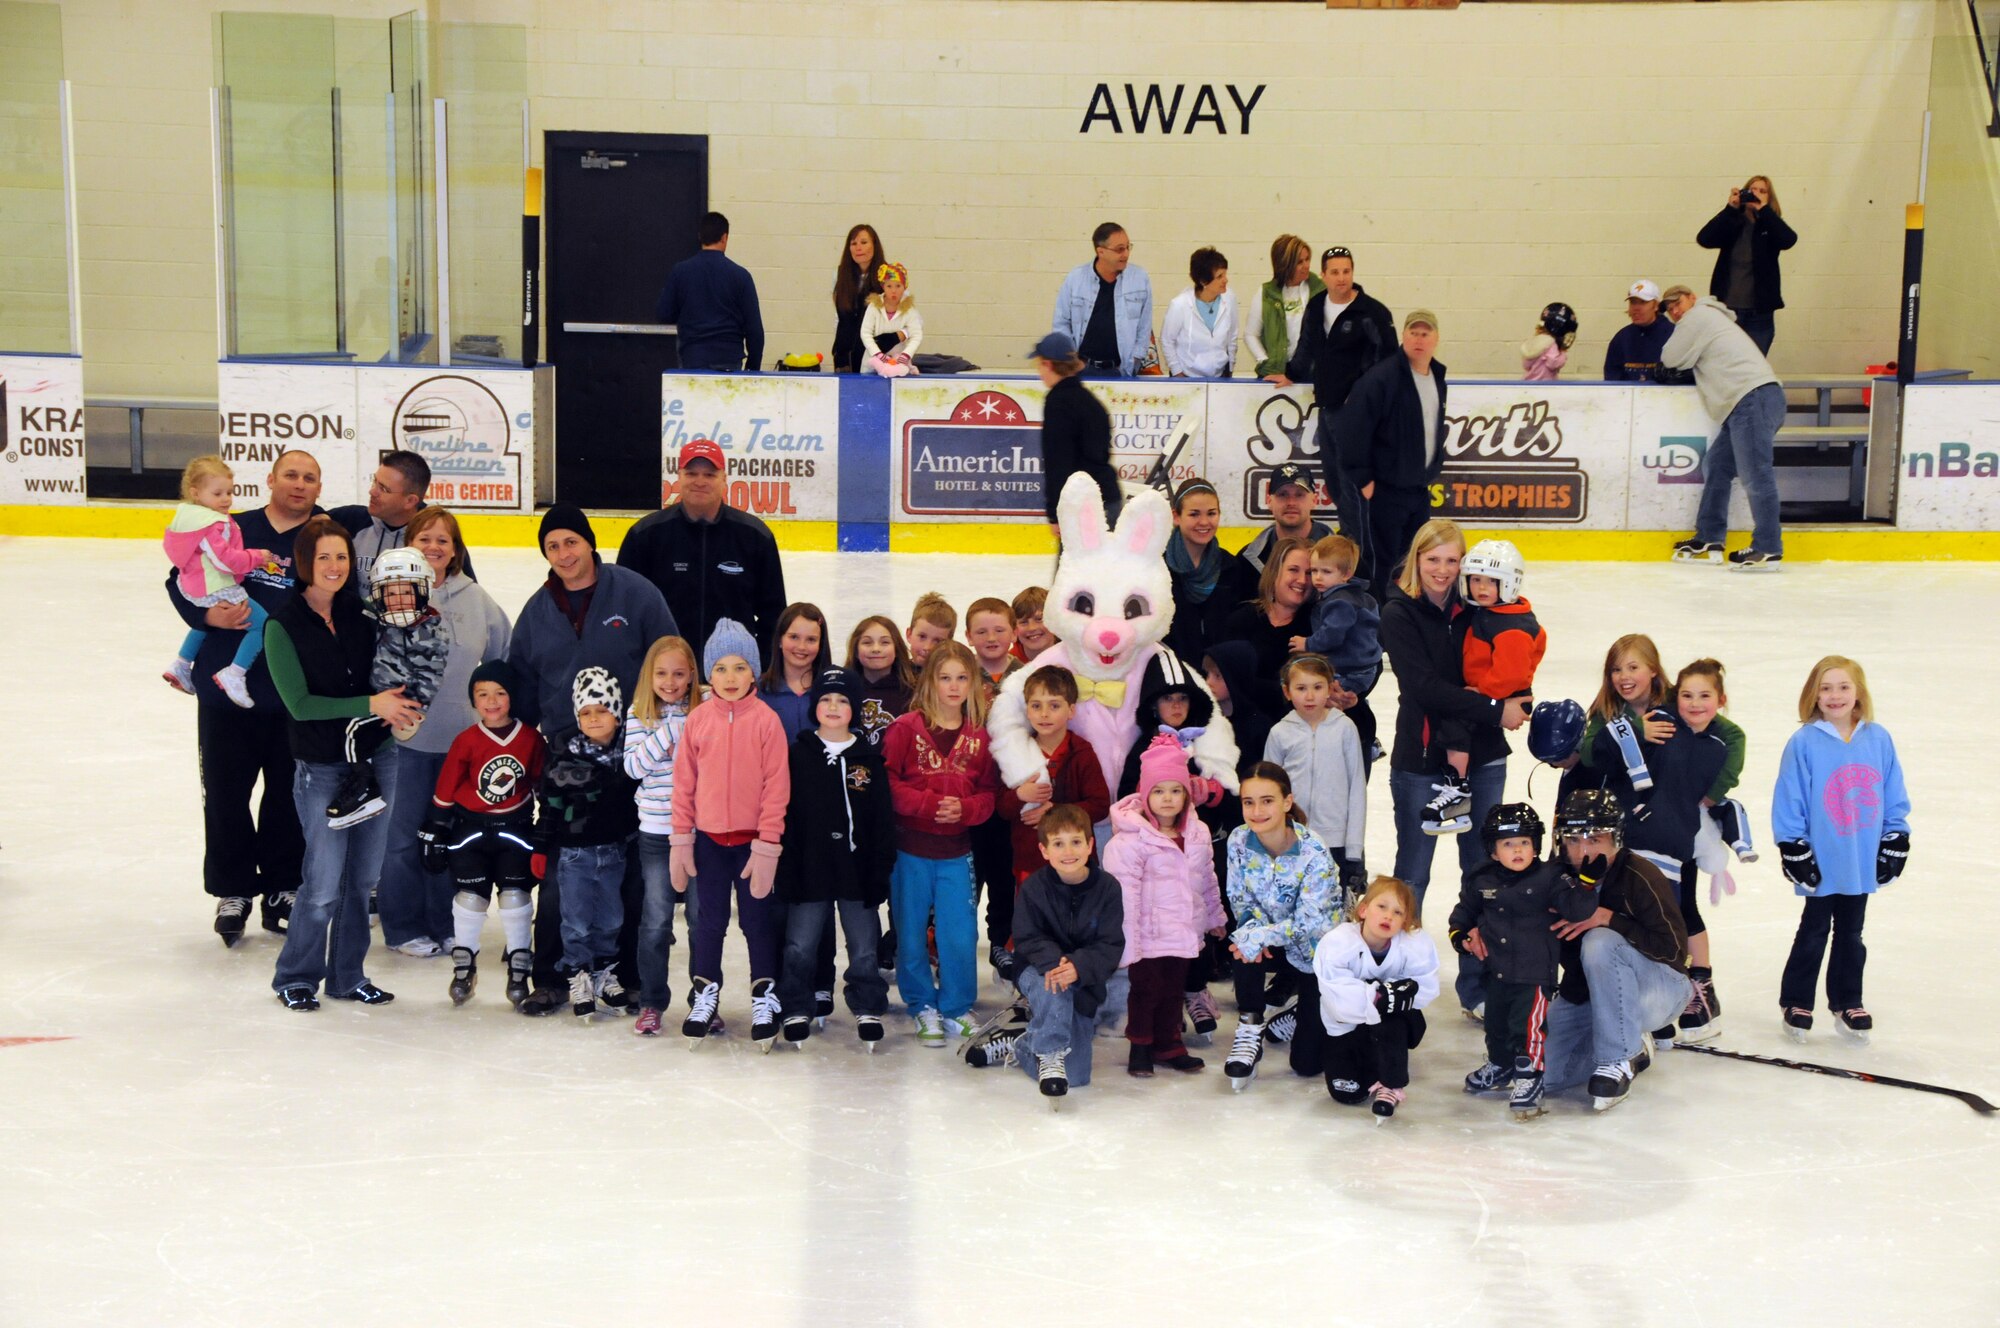 Minnesota National Guard families pose for a group picture with the Easter Bunny while attending the Minnesota National Guard Hockey Tournament.  The tournament was held at the Duluth Heritage Sports Center in Duluth, Minn.  (U.S. Air Force photo by Master Sgt. Ralph J. Kapustka)